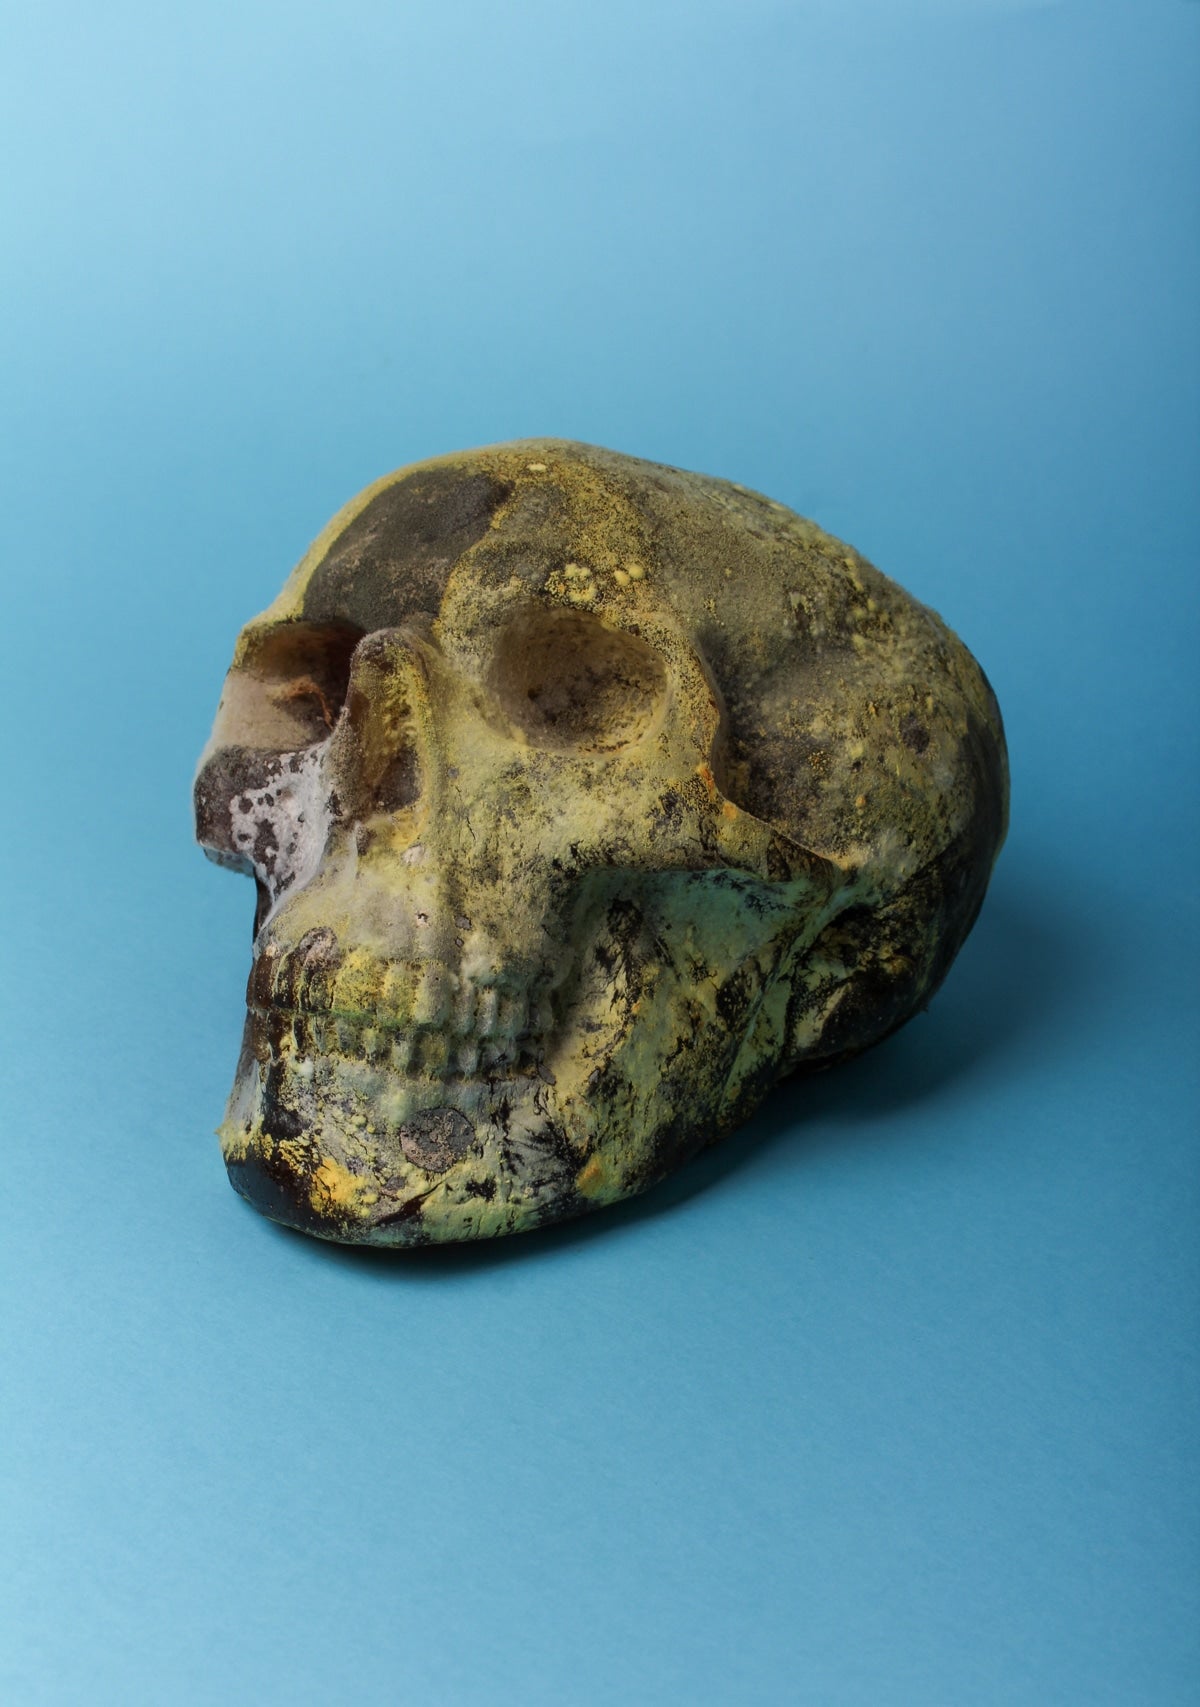 0025 - Photograph of a rotting skull made of jelly